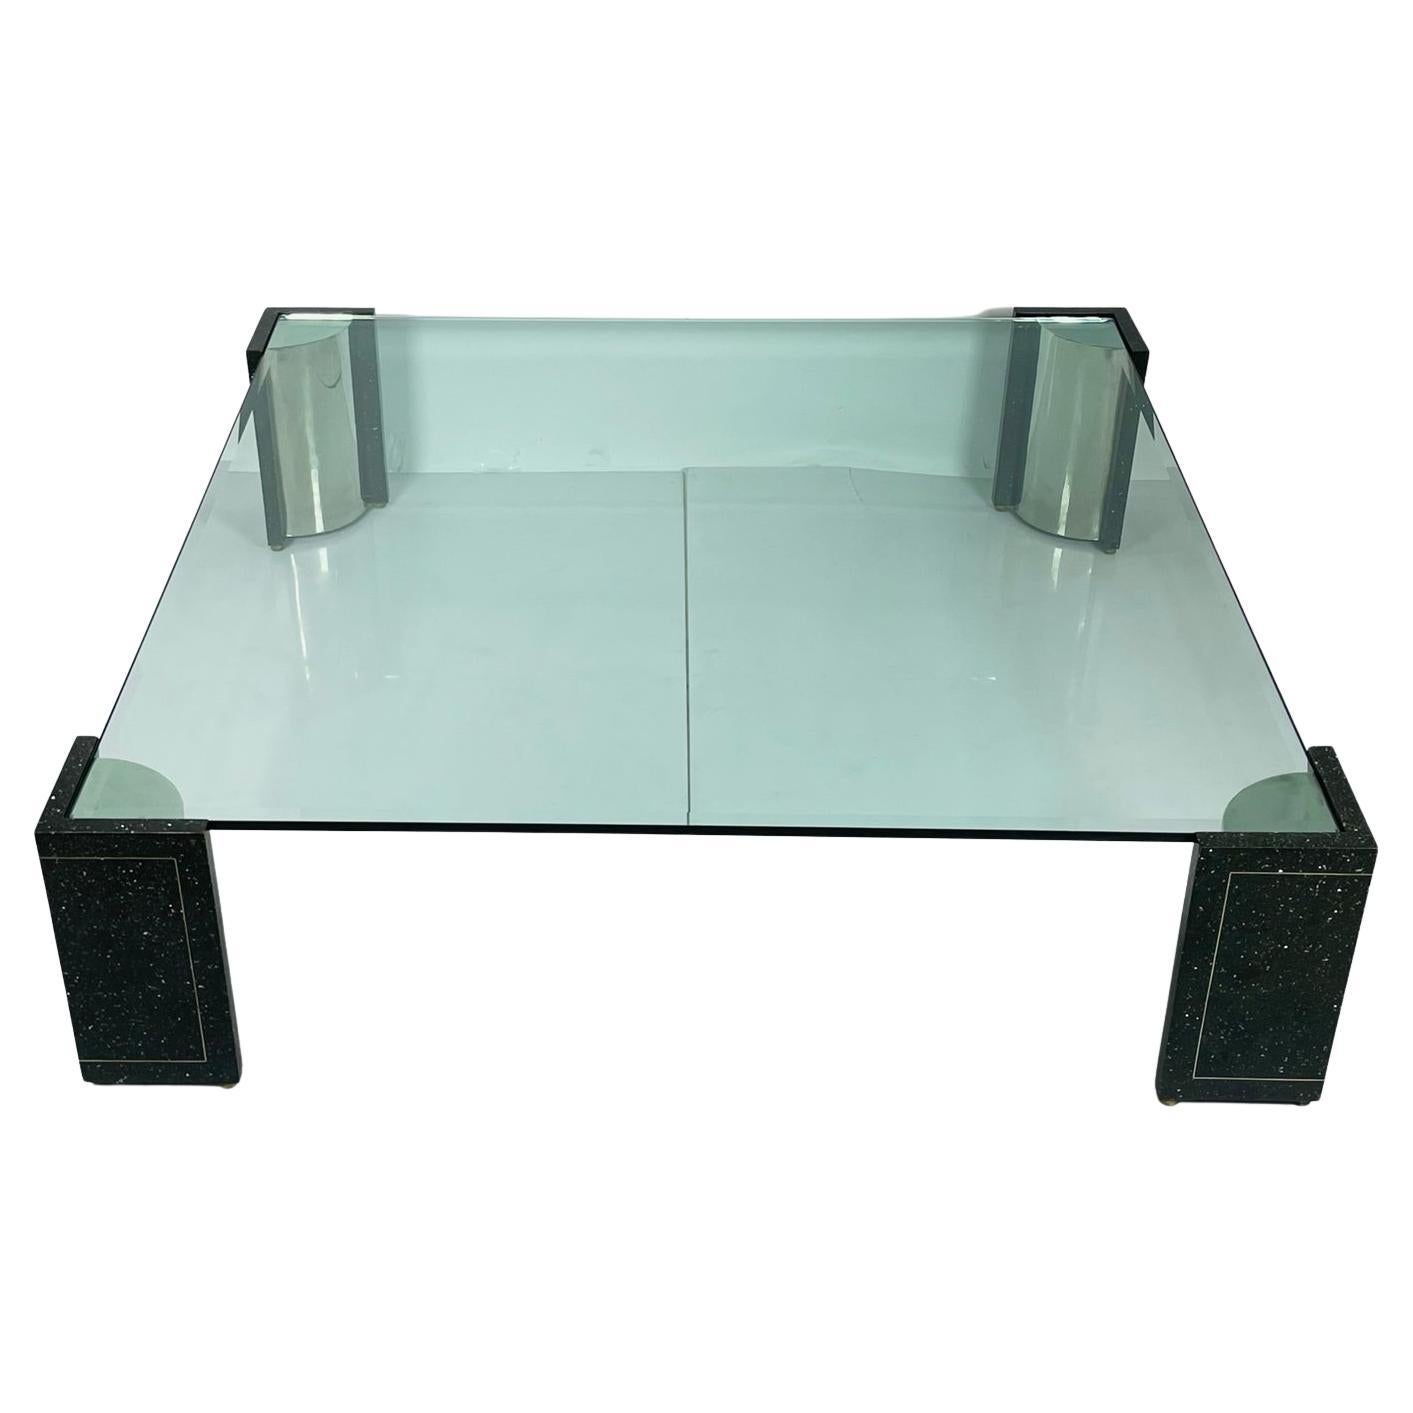 Introducing the Terrazzo, Stainless Steel & Glass Coffee Table, a stunning piece of furniture inspired by the iconic designer Karl Springer and crafted in the USA during the 1970s. This elegant coffee table features a sleek and modern design that